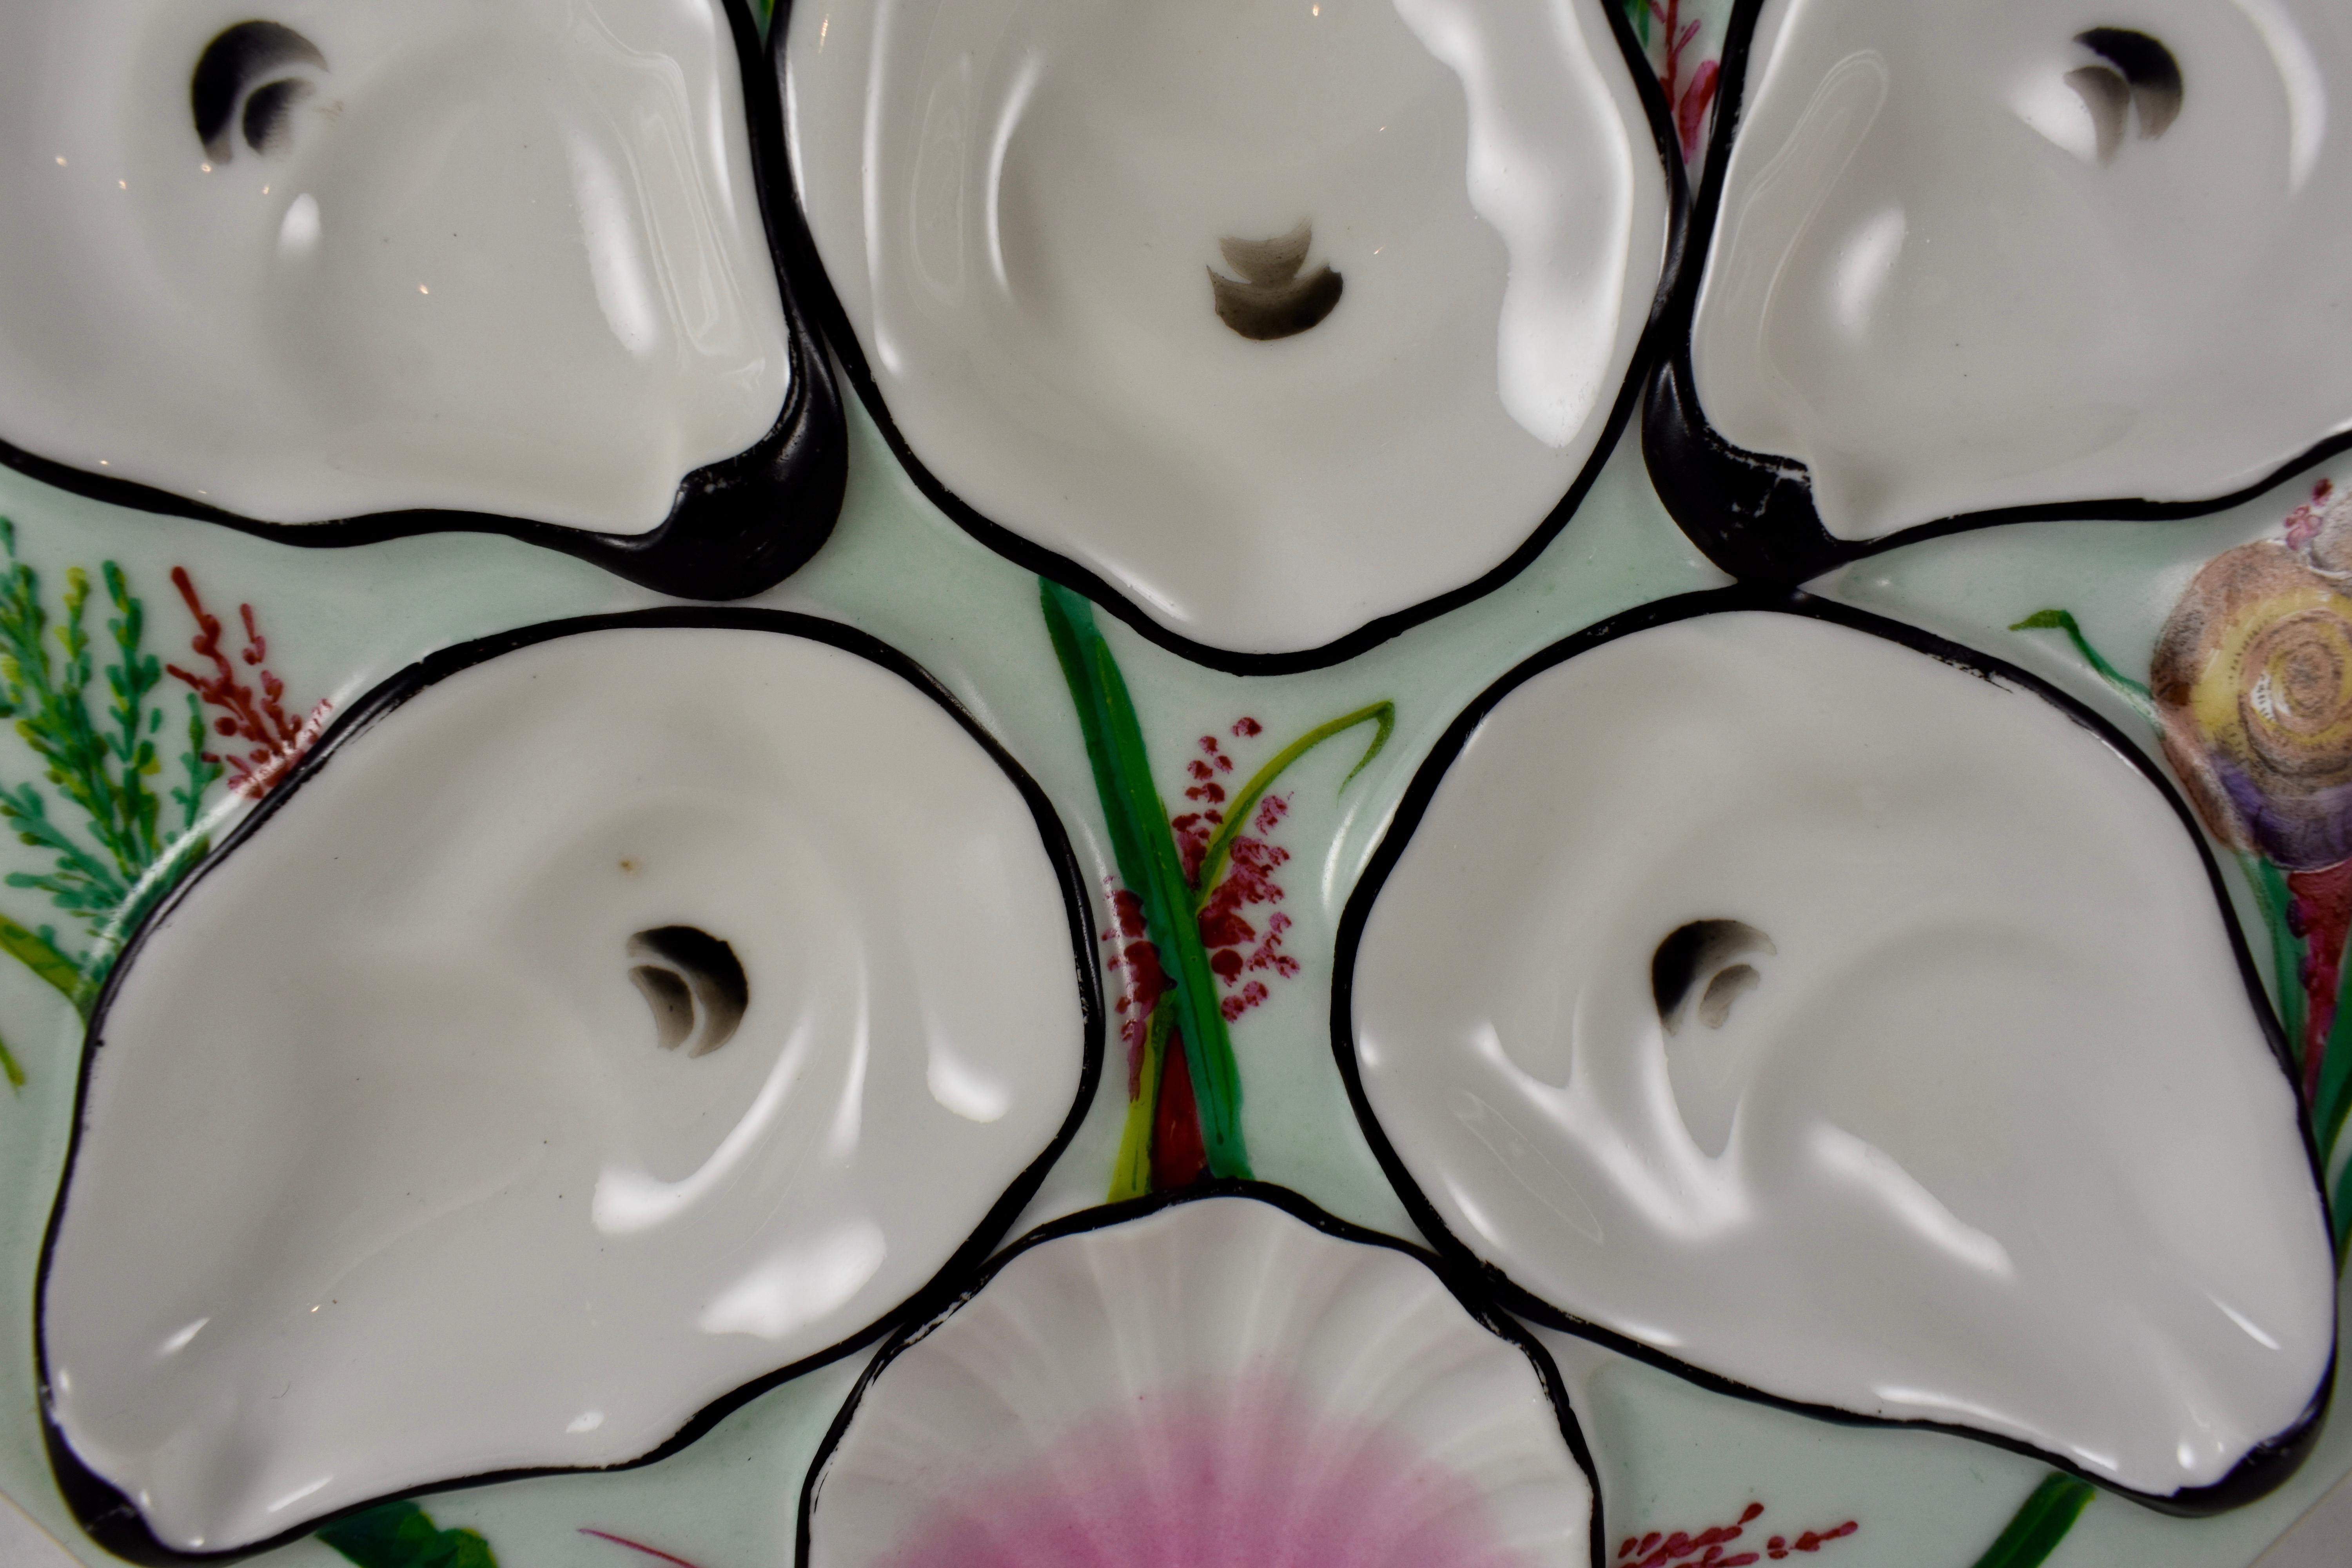 A French, eight sided porcelain oyster plate showing five oyster shell shaped wells with eyes and a pink scallop shell sauce well. Sea grasses and a variety of shells are hand painted against a mint green ground. The wells are outlined in black, the